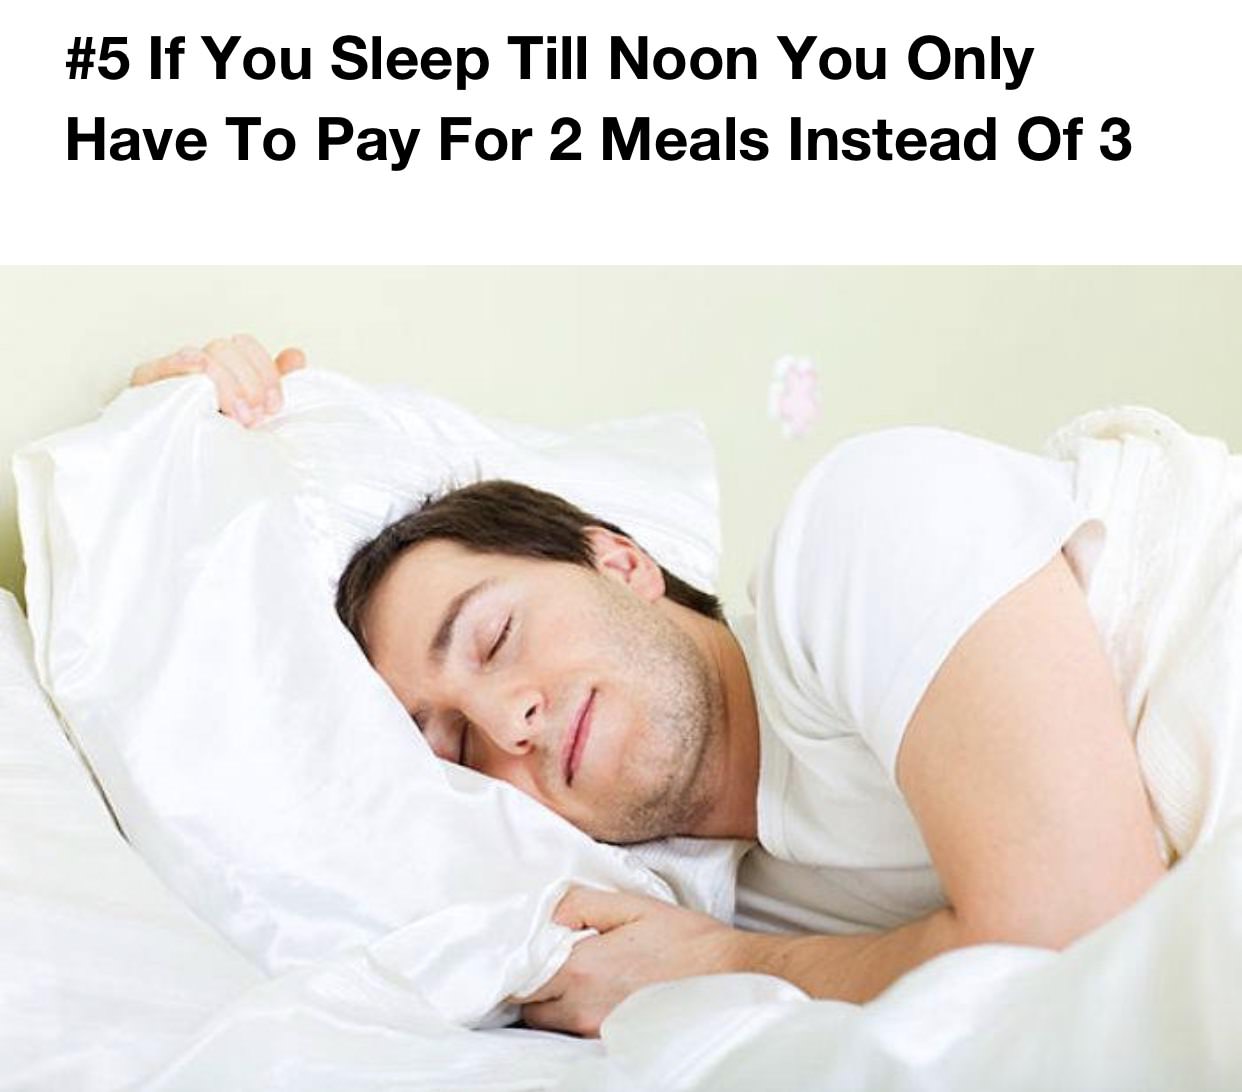 just one more video meme - If You Sleep Till Noon You Only Have To Pay For 2 Meals Instead of 3